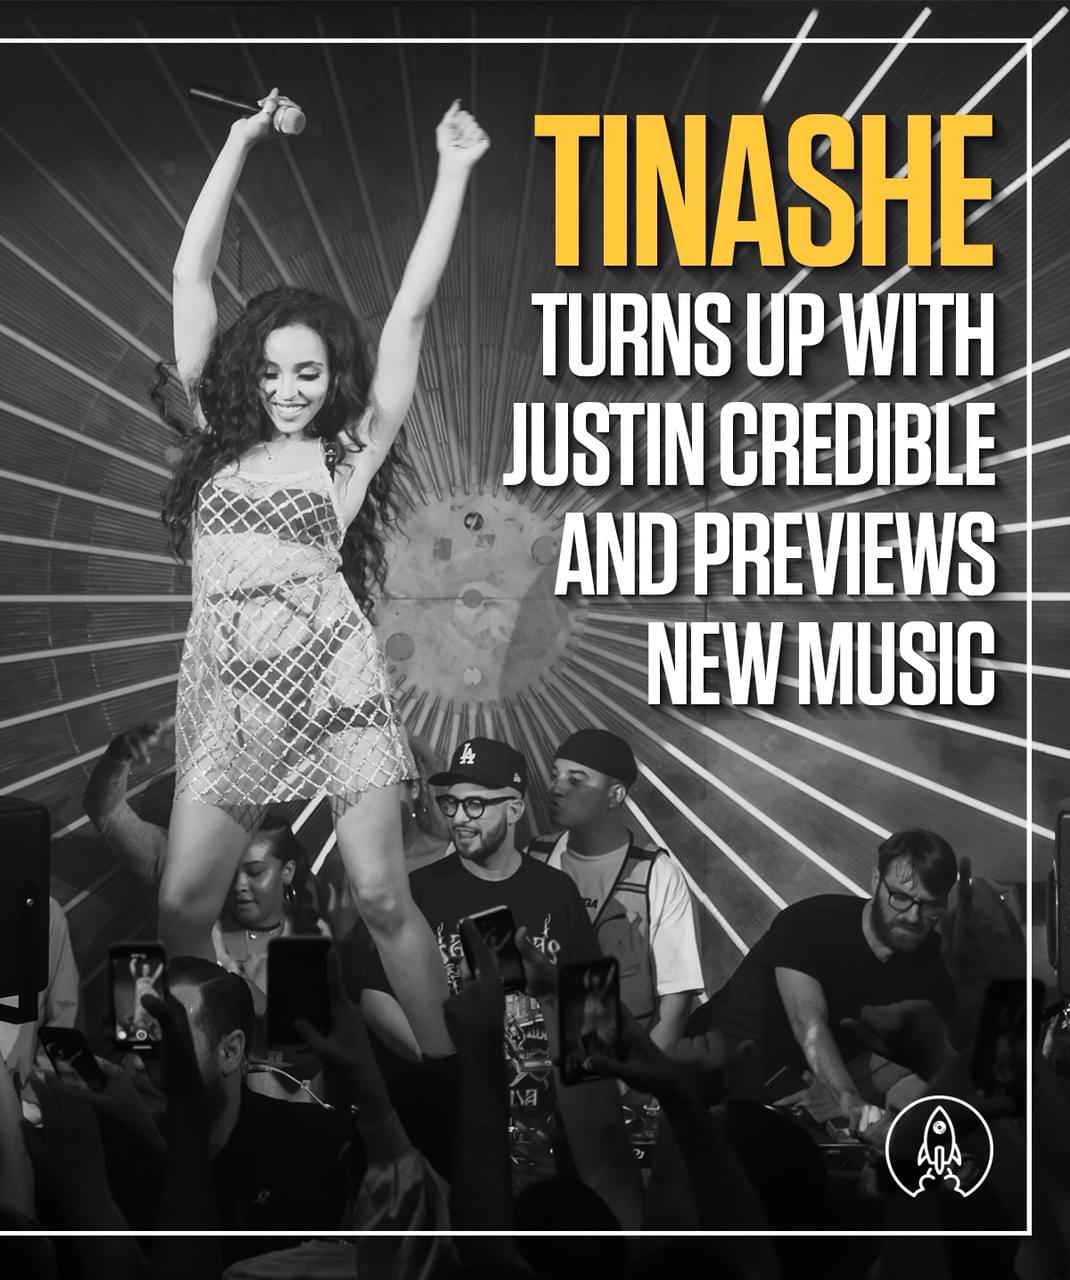 Tinashe Turns up w/ Justin Credible & Previews New Music [WATCH]